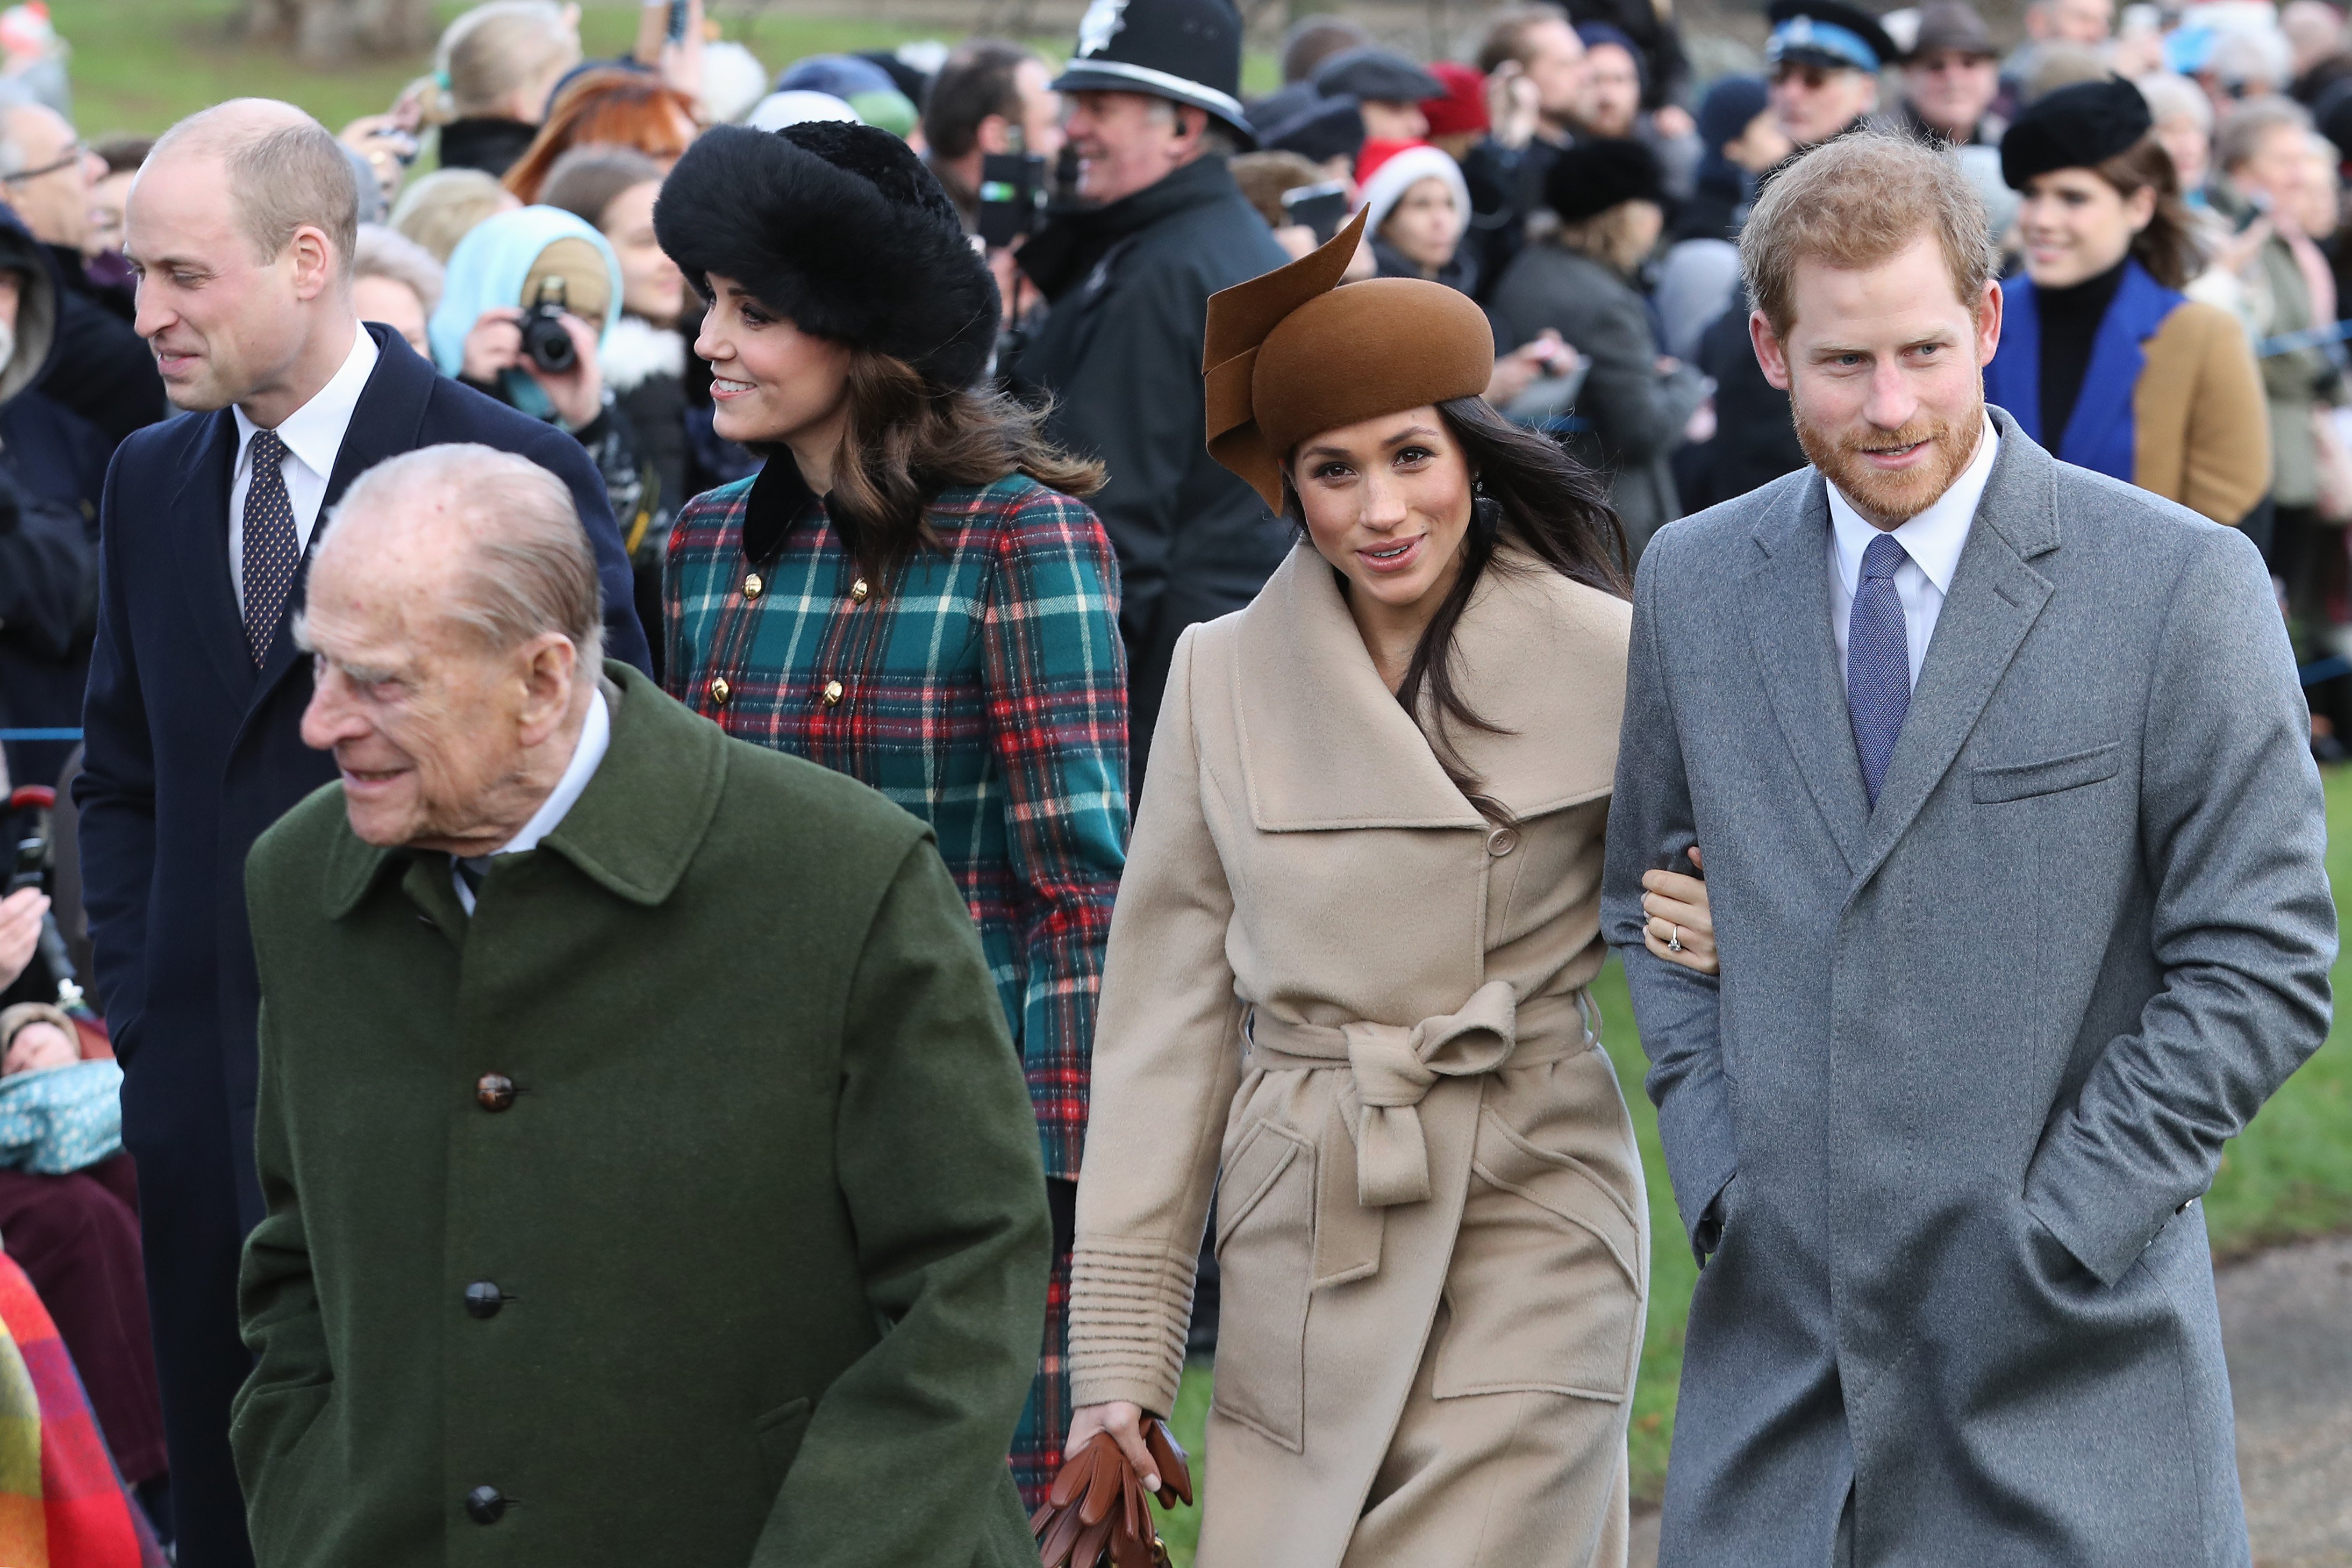 Prince Philip walks ahead of Prince Harry and Meghan Markle on Christmas in 2017